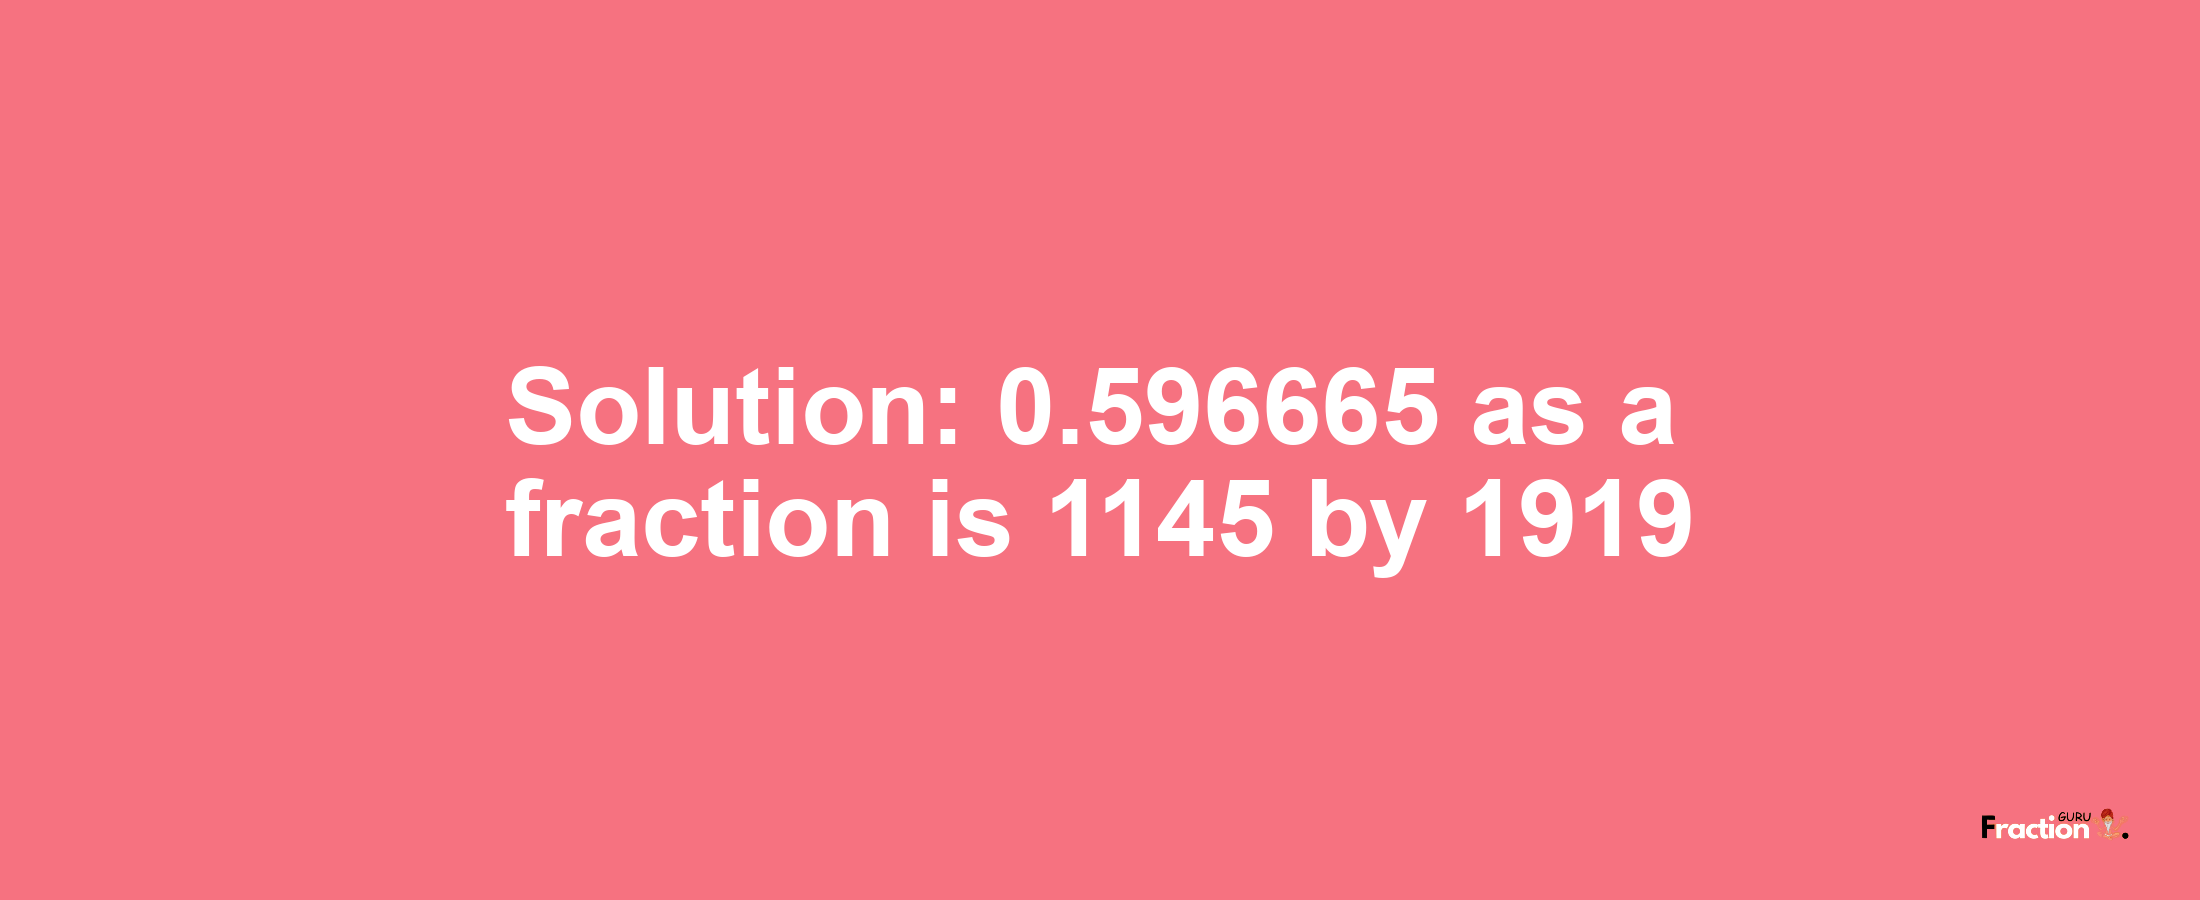 Solution:0.596665 as a fraction is 1145/1919